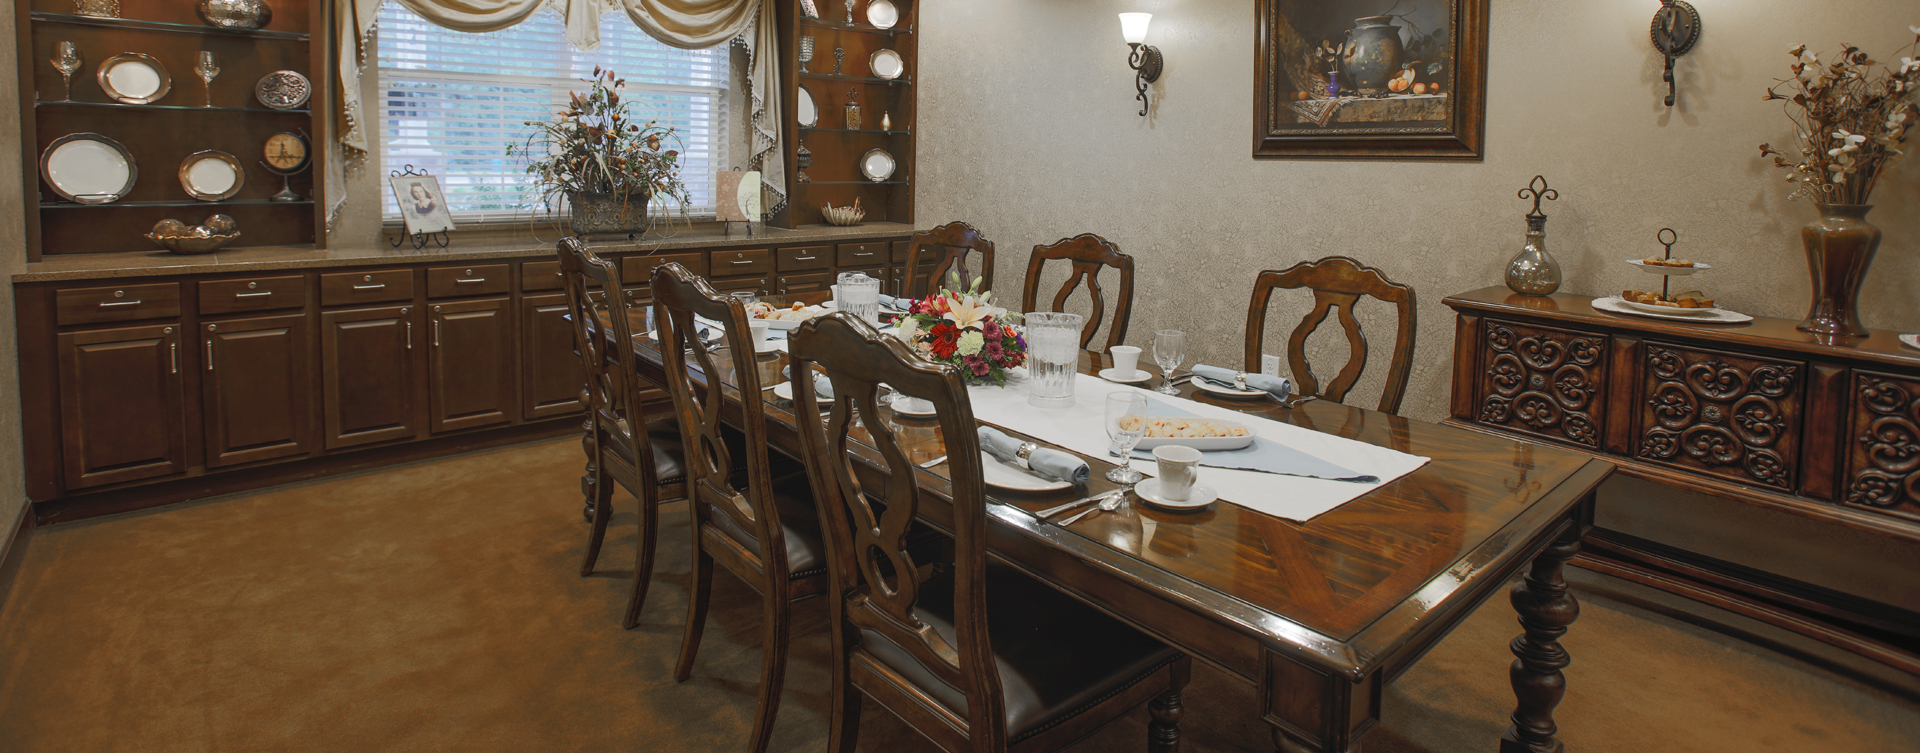 Have fun with themed and holiday meals in the private dining room at Bickford of Carmel